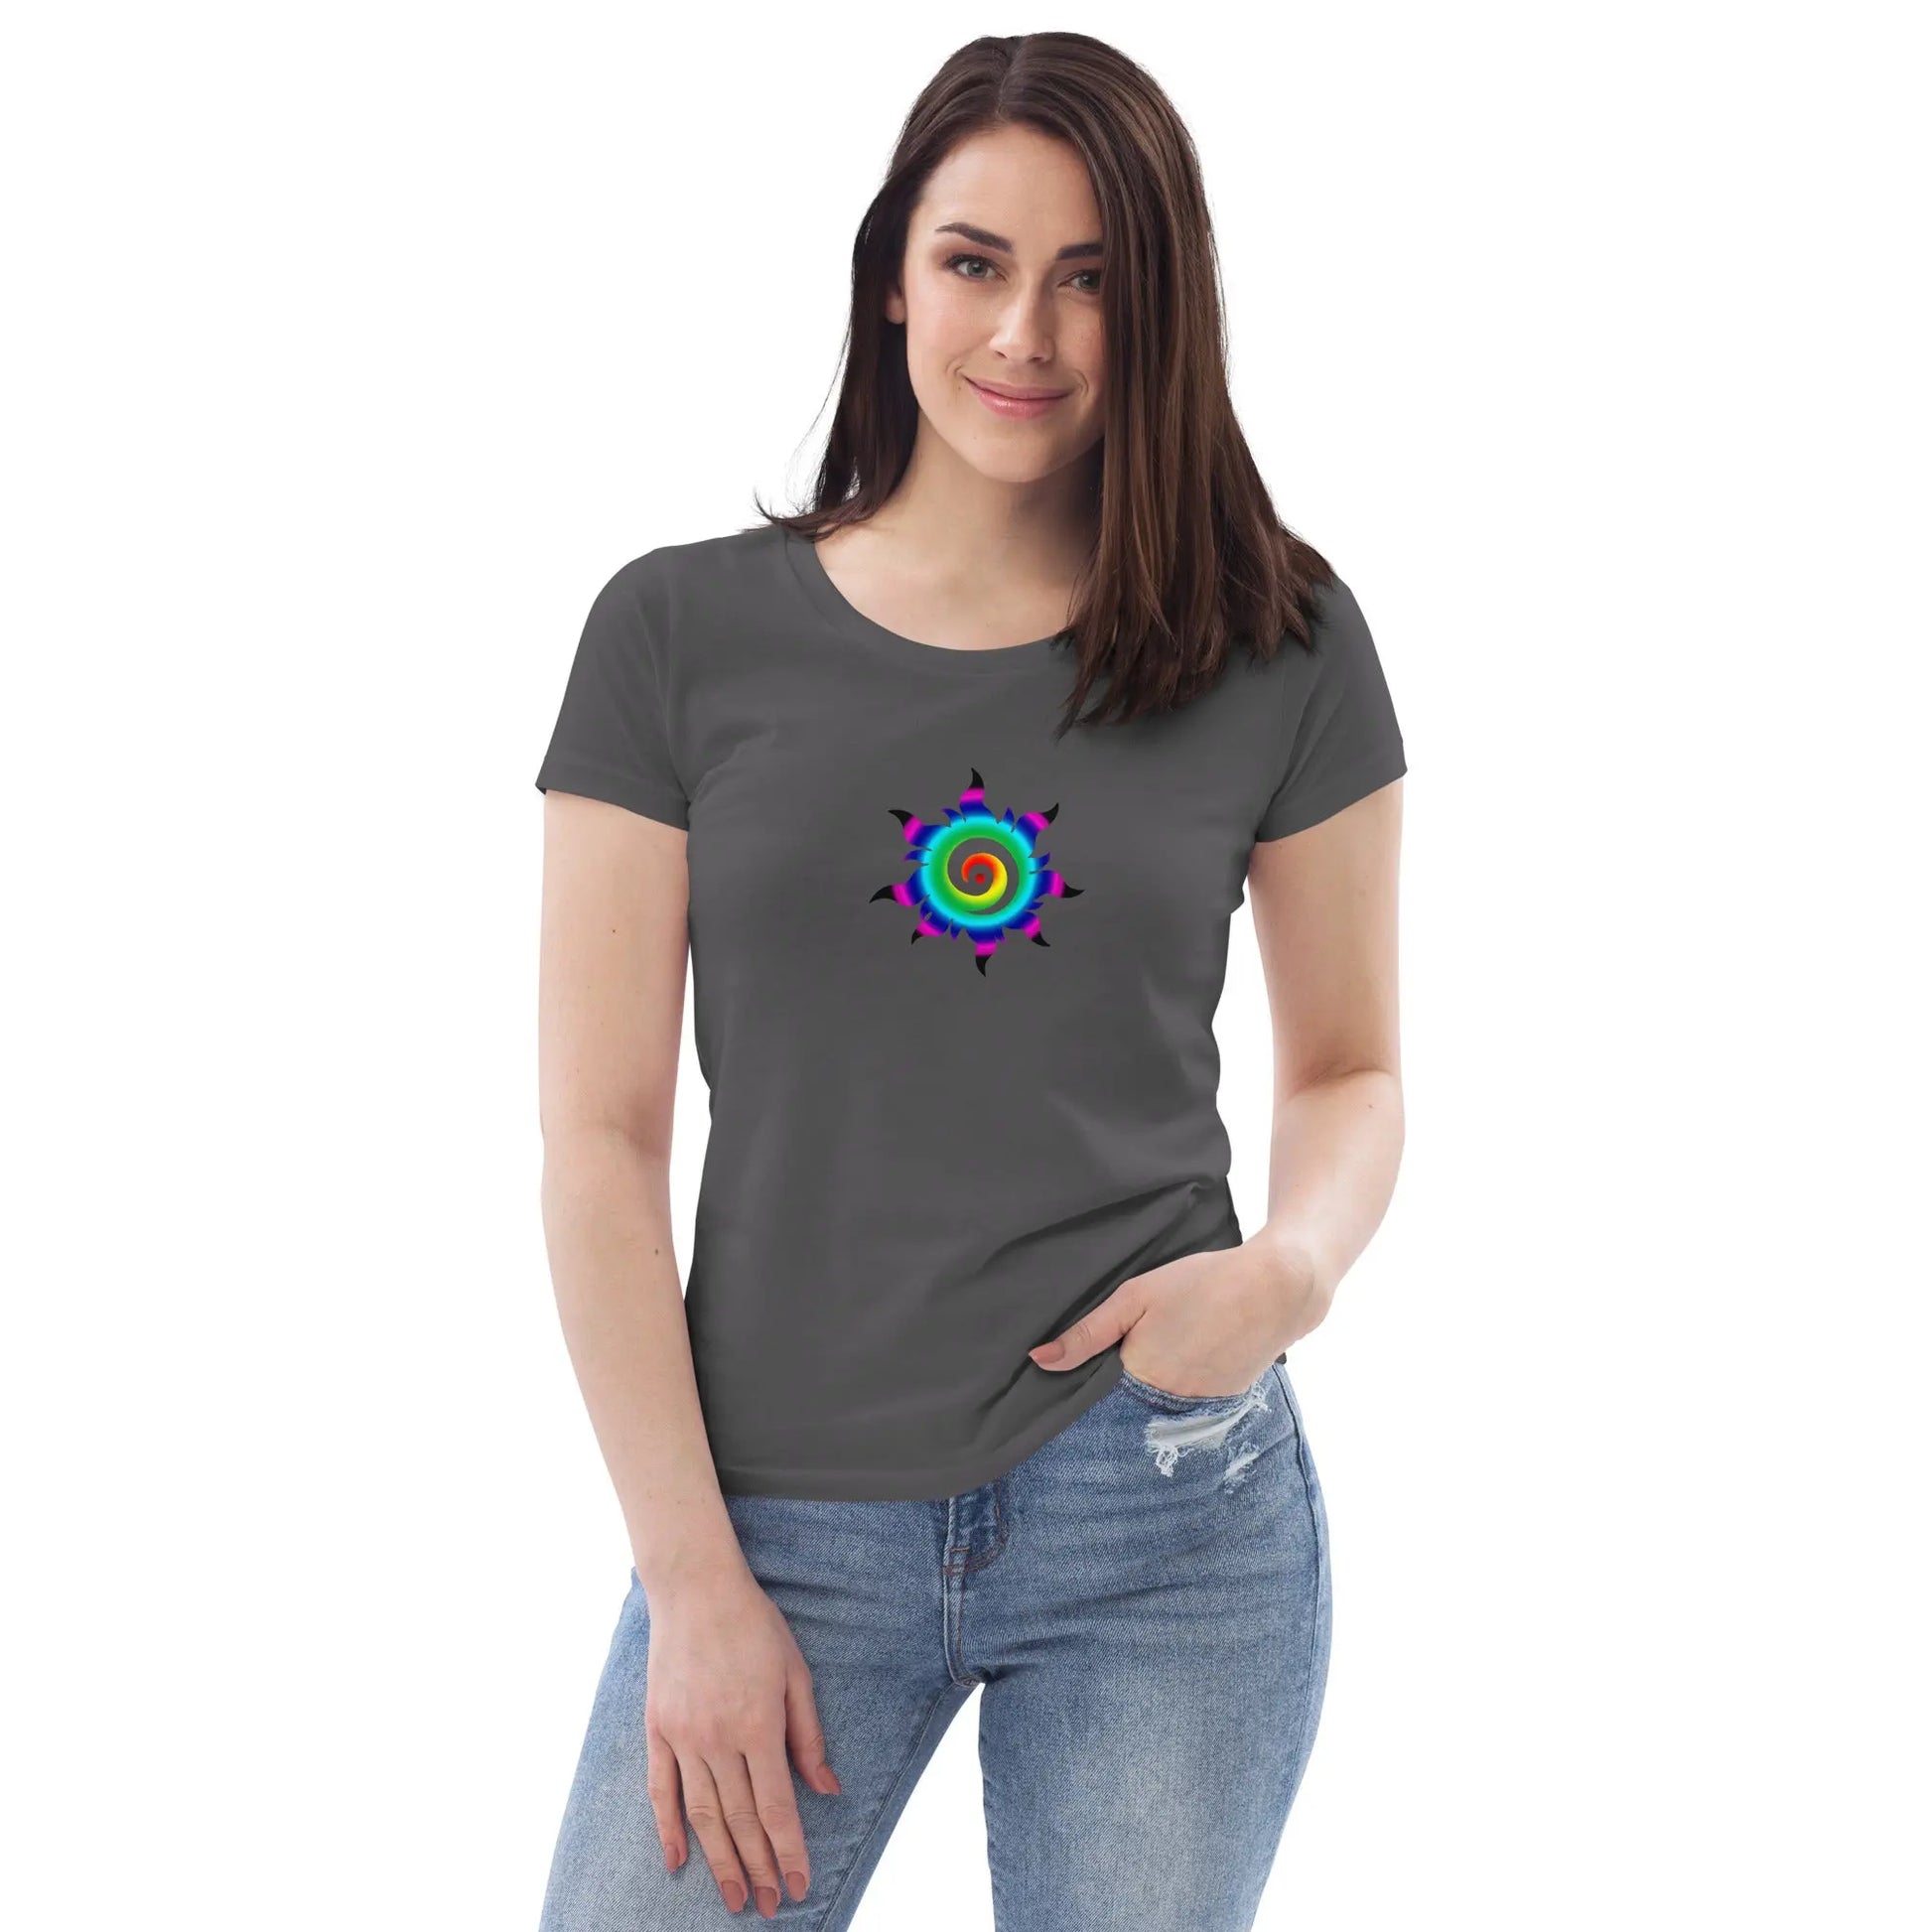 Women's fitted eco tee ActSunx - Image #3